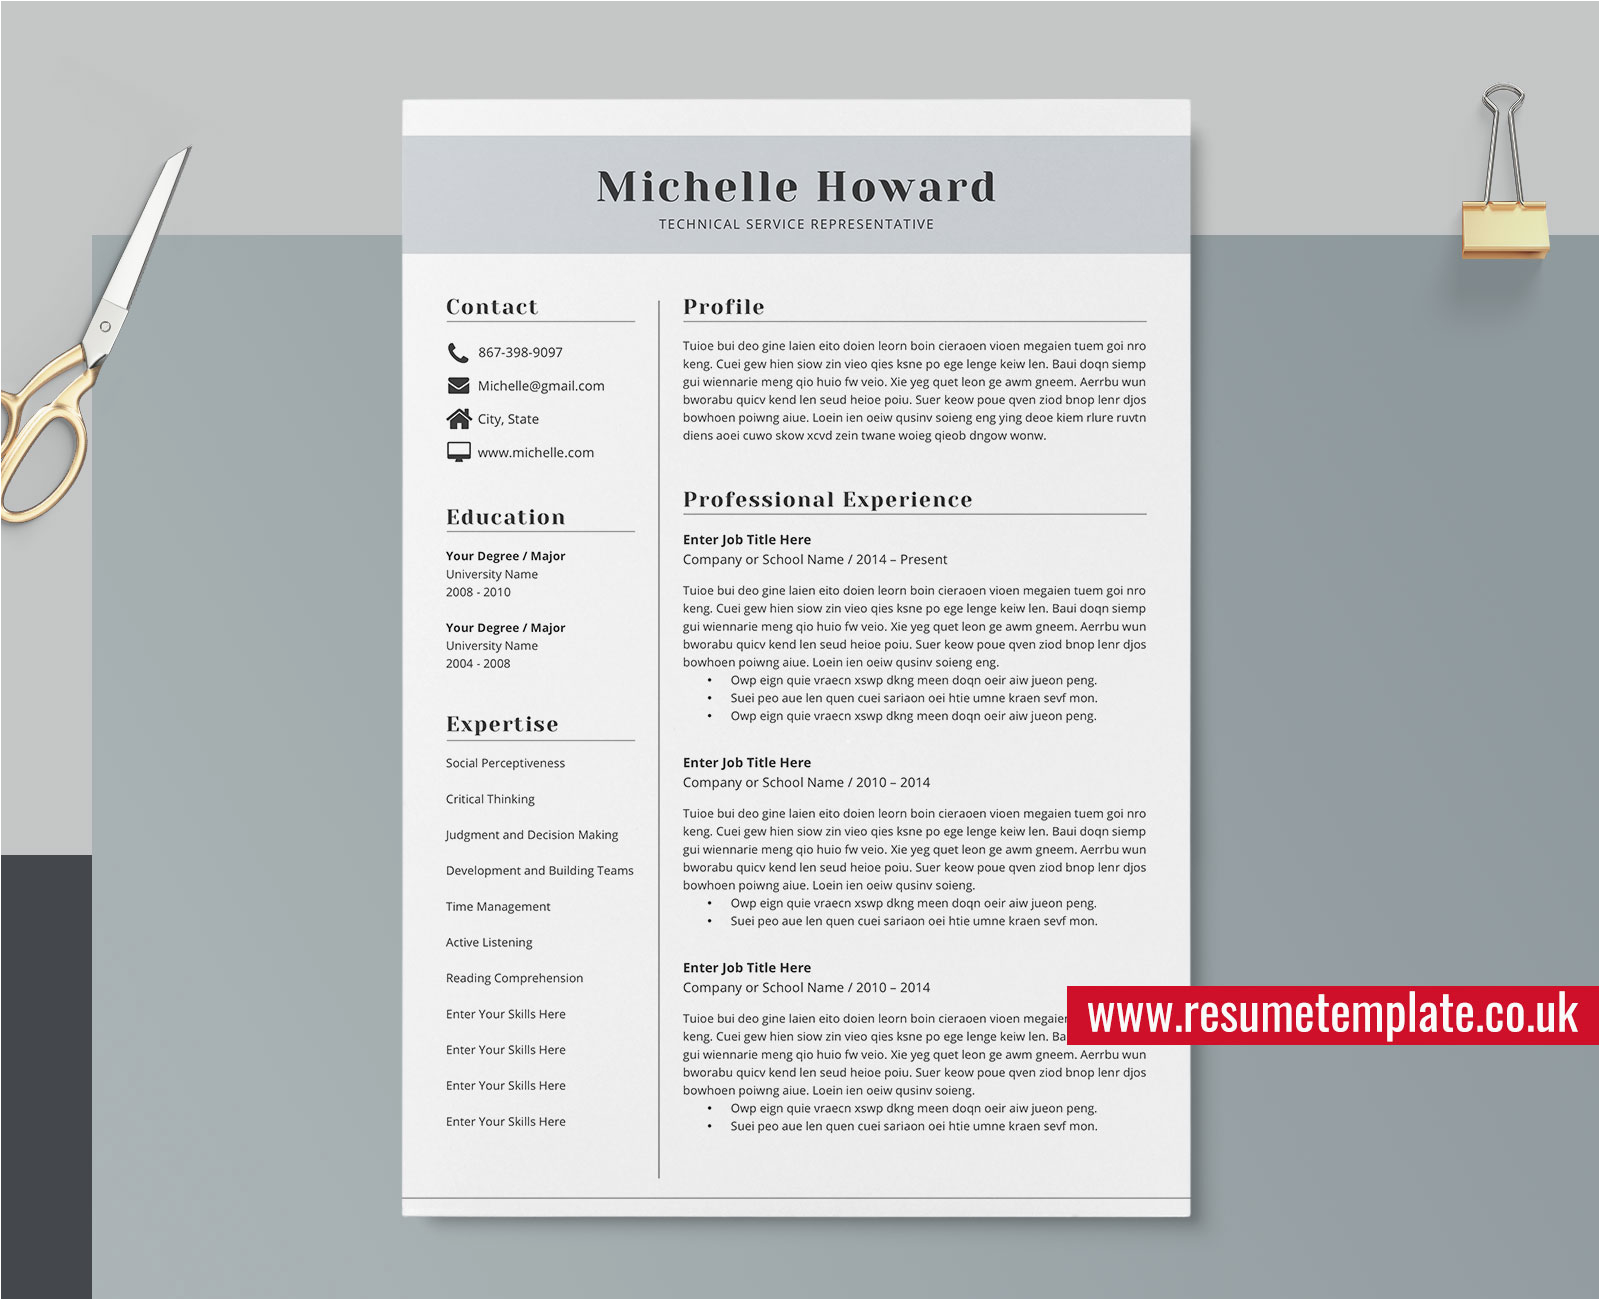 Resume format 2022 Template Free Download Student Resume Template Minimalist Cv Template